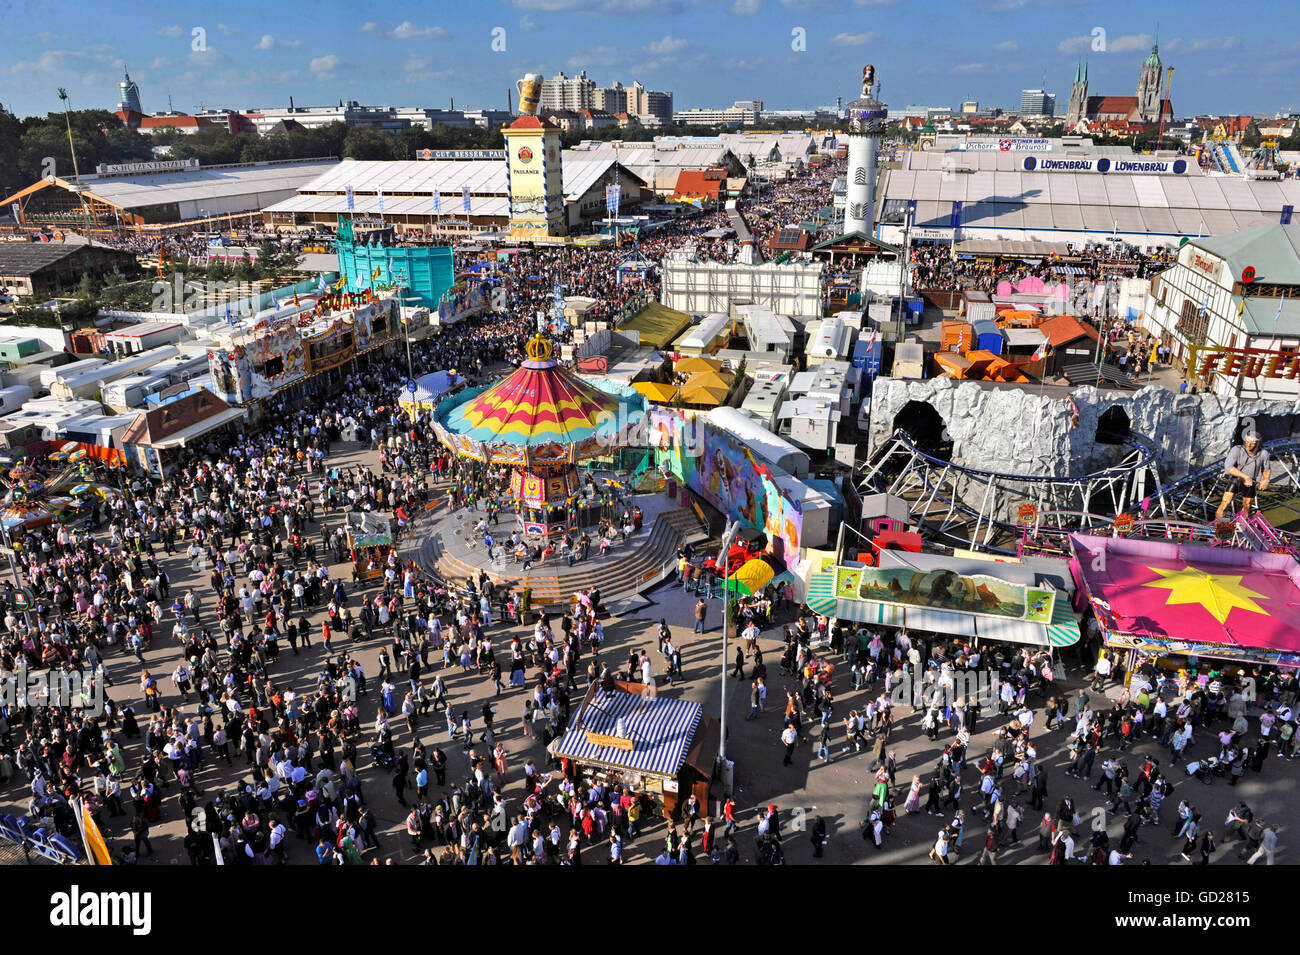 festival,funfair,oktoberfest Munich,overview from the ferries wheel,19.09.2010,above,beer tent,beer tents,in background St. Paul,funfair,carnival,Therese's Green,crowd,crowds,crowds of people,crowd of people,typical,Bavarian,Bavaria,weekend,weekends,Wiesn Weekend,Sunday afternoon,weather,weathers,fair,beautiful,clear,joy,leisure time,free time,spare time,inhabitants of Munich,inhabitant of Munich,anniversary of 200 years Oktoberfest,1810 bis 2010,bird's-eye view,festival,festivals,Ferris wheel,big wheel,Ferris wheels,bi,Additional-Rights-Clearences-Not Available Stock Photo